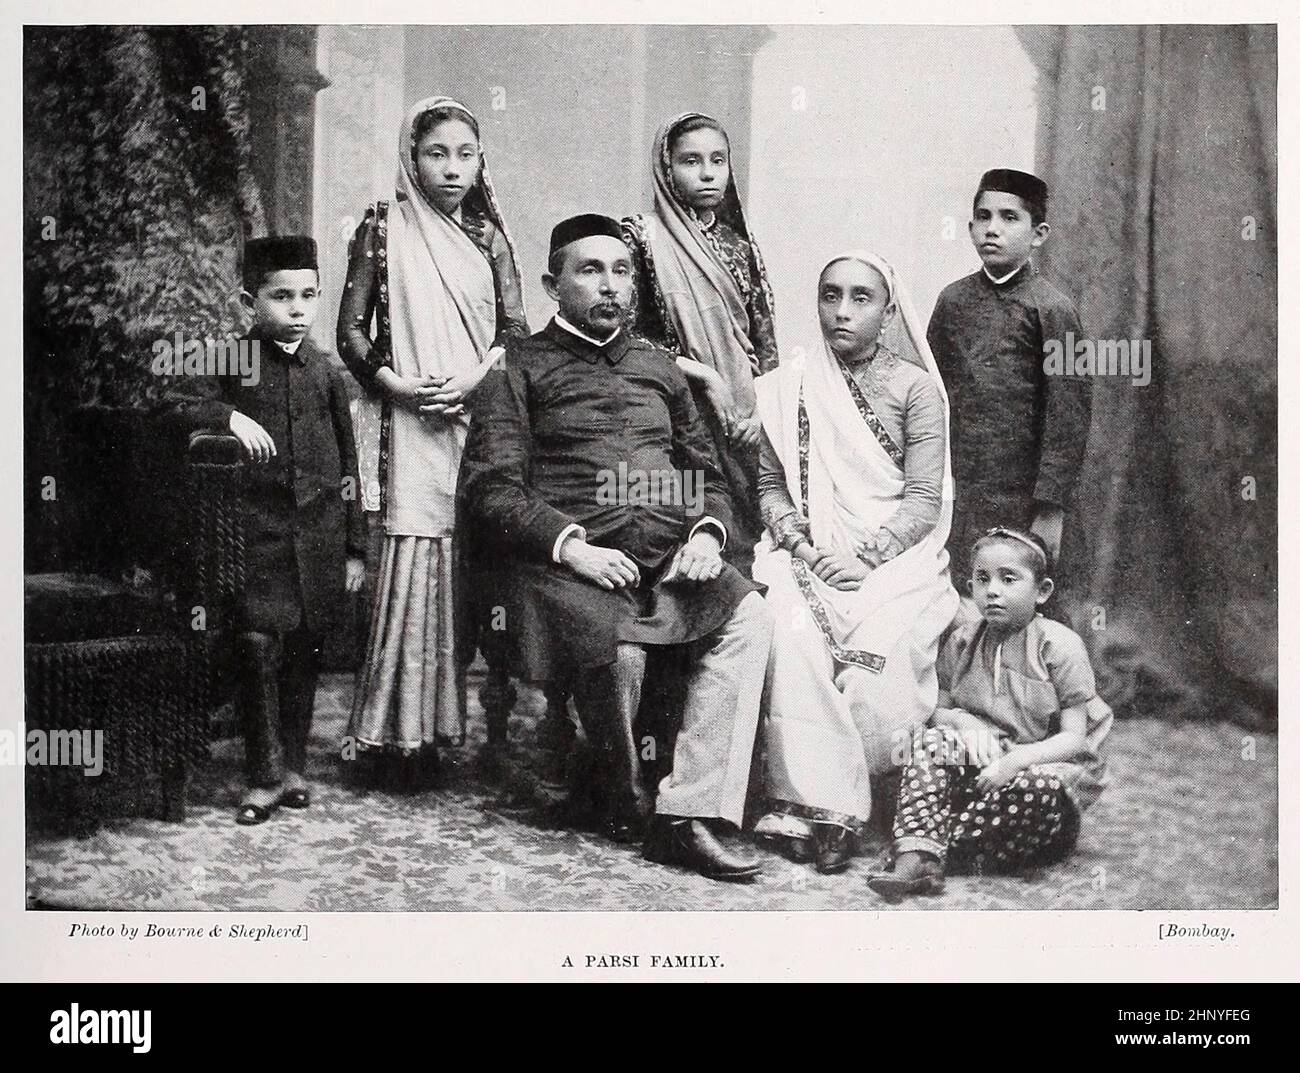 A Parsi family from The living races of mankind : a popular illustrated account of the customs, habits, pursuits, feasts & ceremonies of the races of mankind throughout the world Volume 1 by Sir Harry Hamilton Johnston, Henry Neville Hutchinson, Richard Lydekker and Dr. A. H. Keane published London : Hutchinson & Co. 1902 Stock Photo